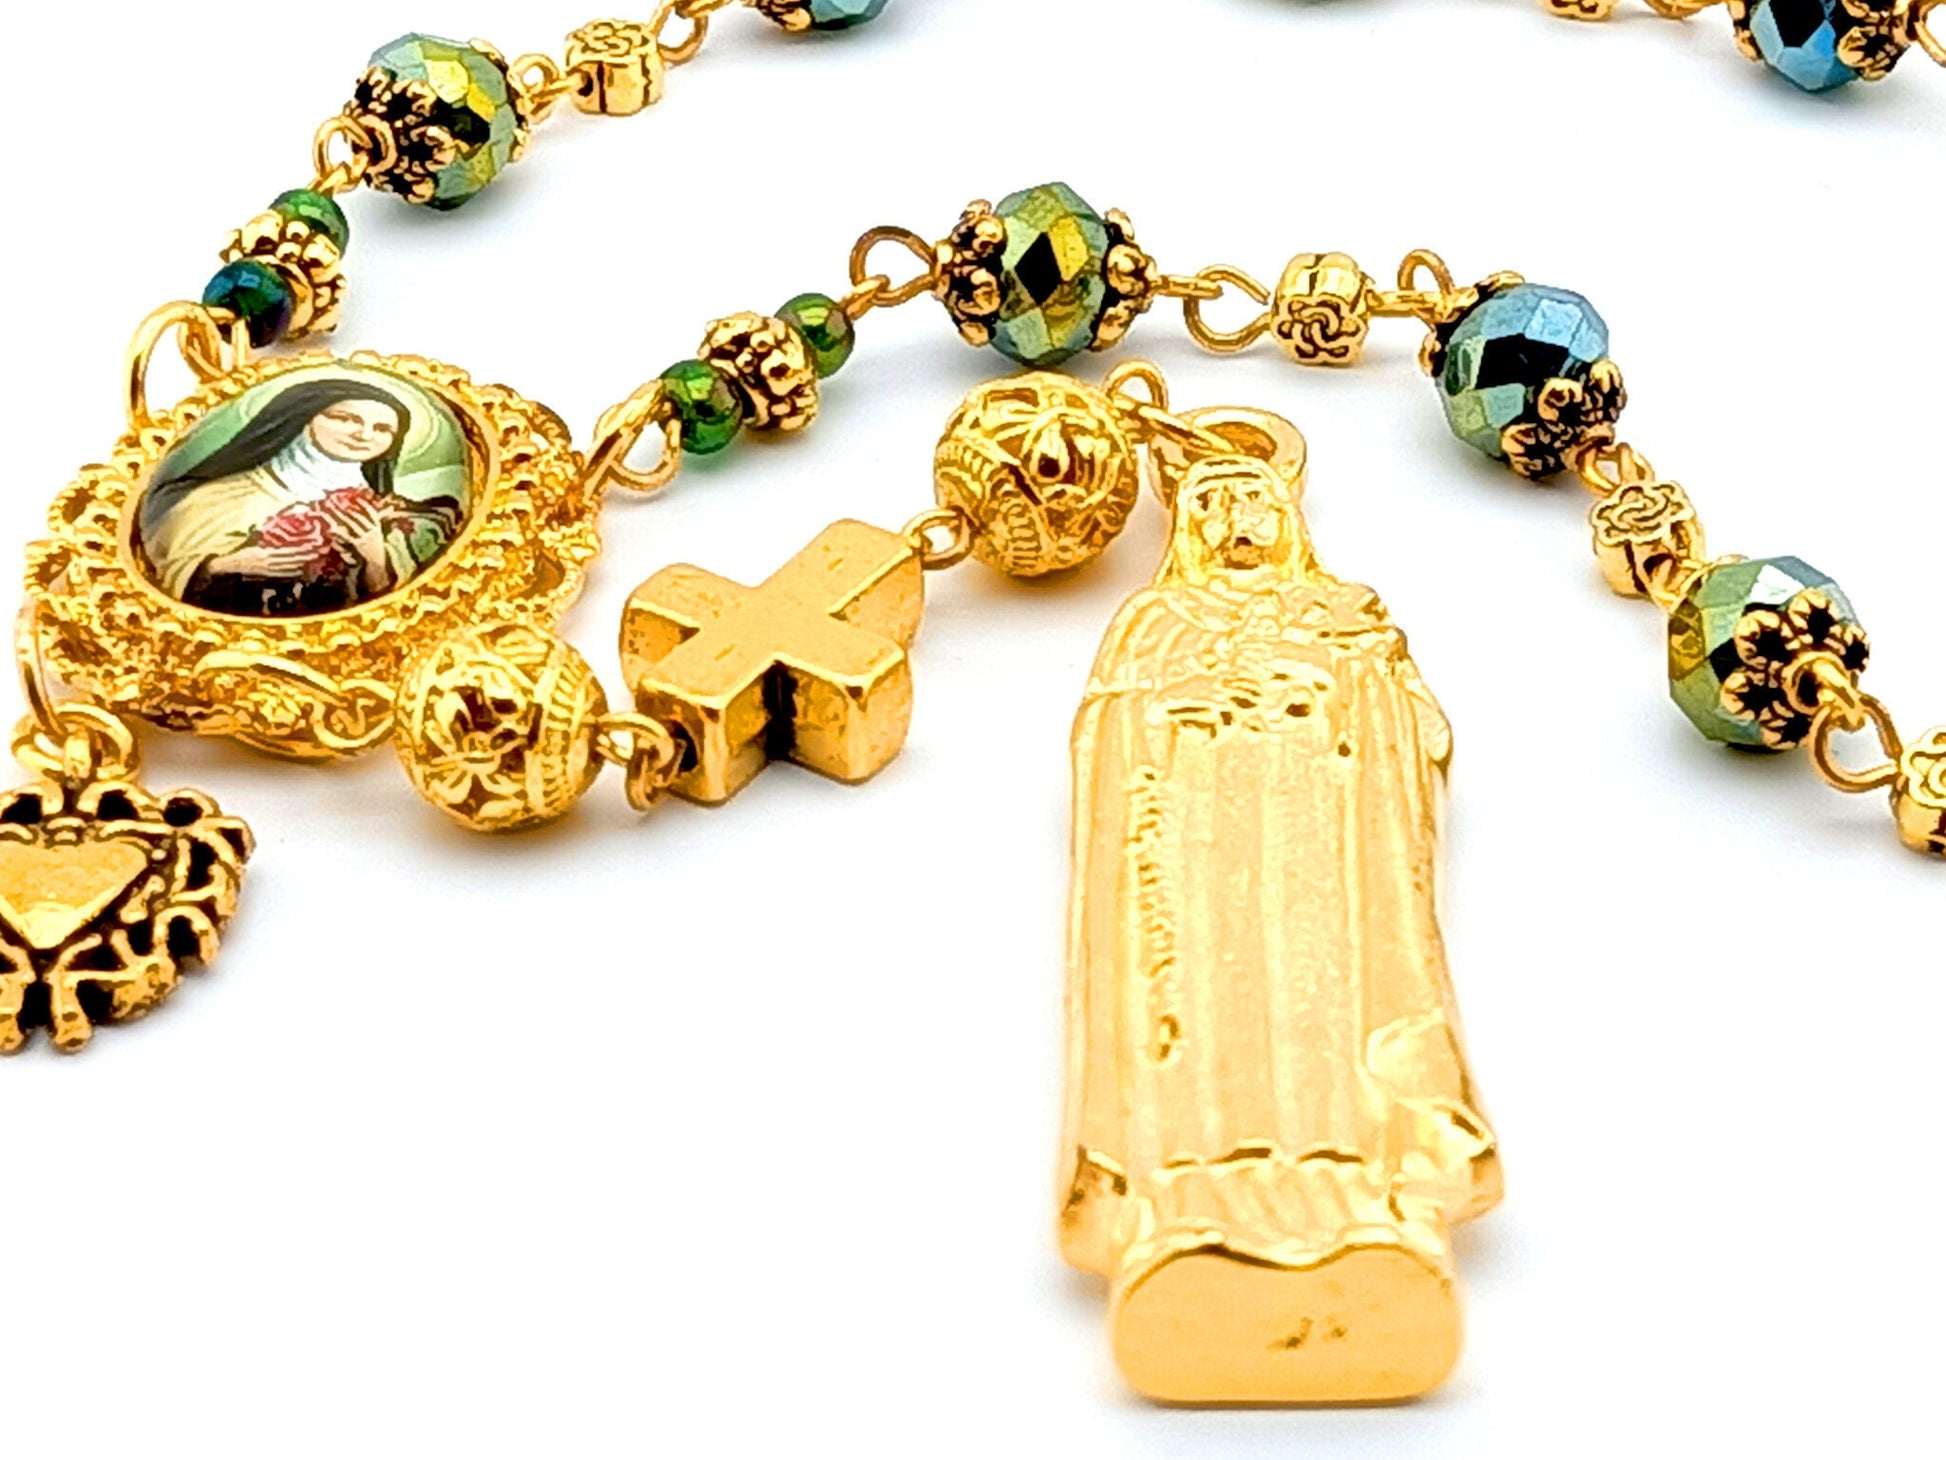 Saint Therese of Lisieux unique rosary beads single decade rosary with faceted green glass beads, golden statue medal, picture centre medal and pater bead.